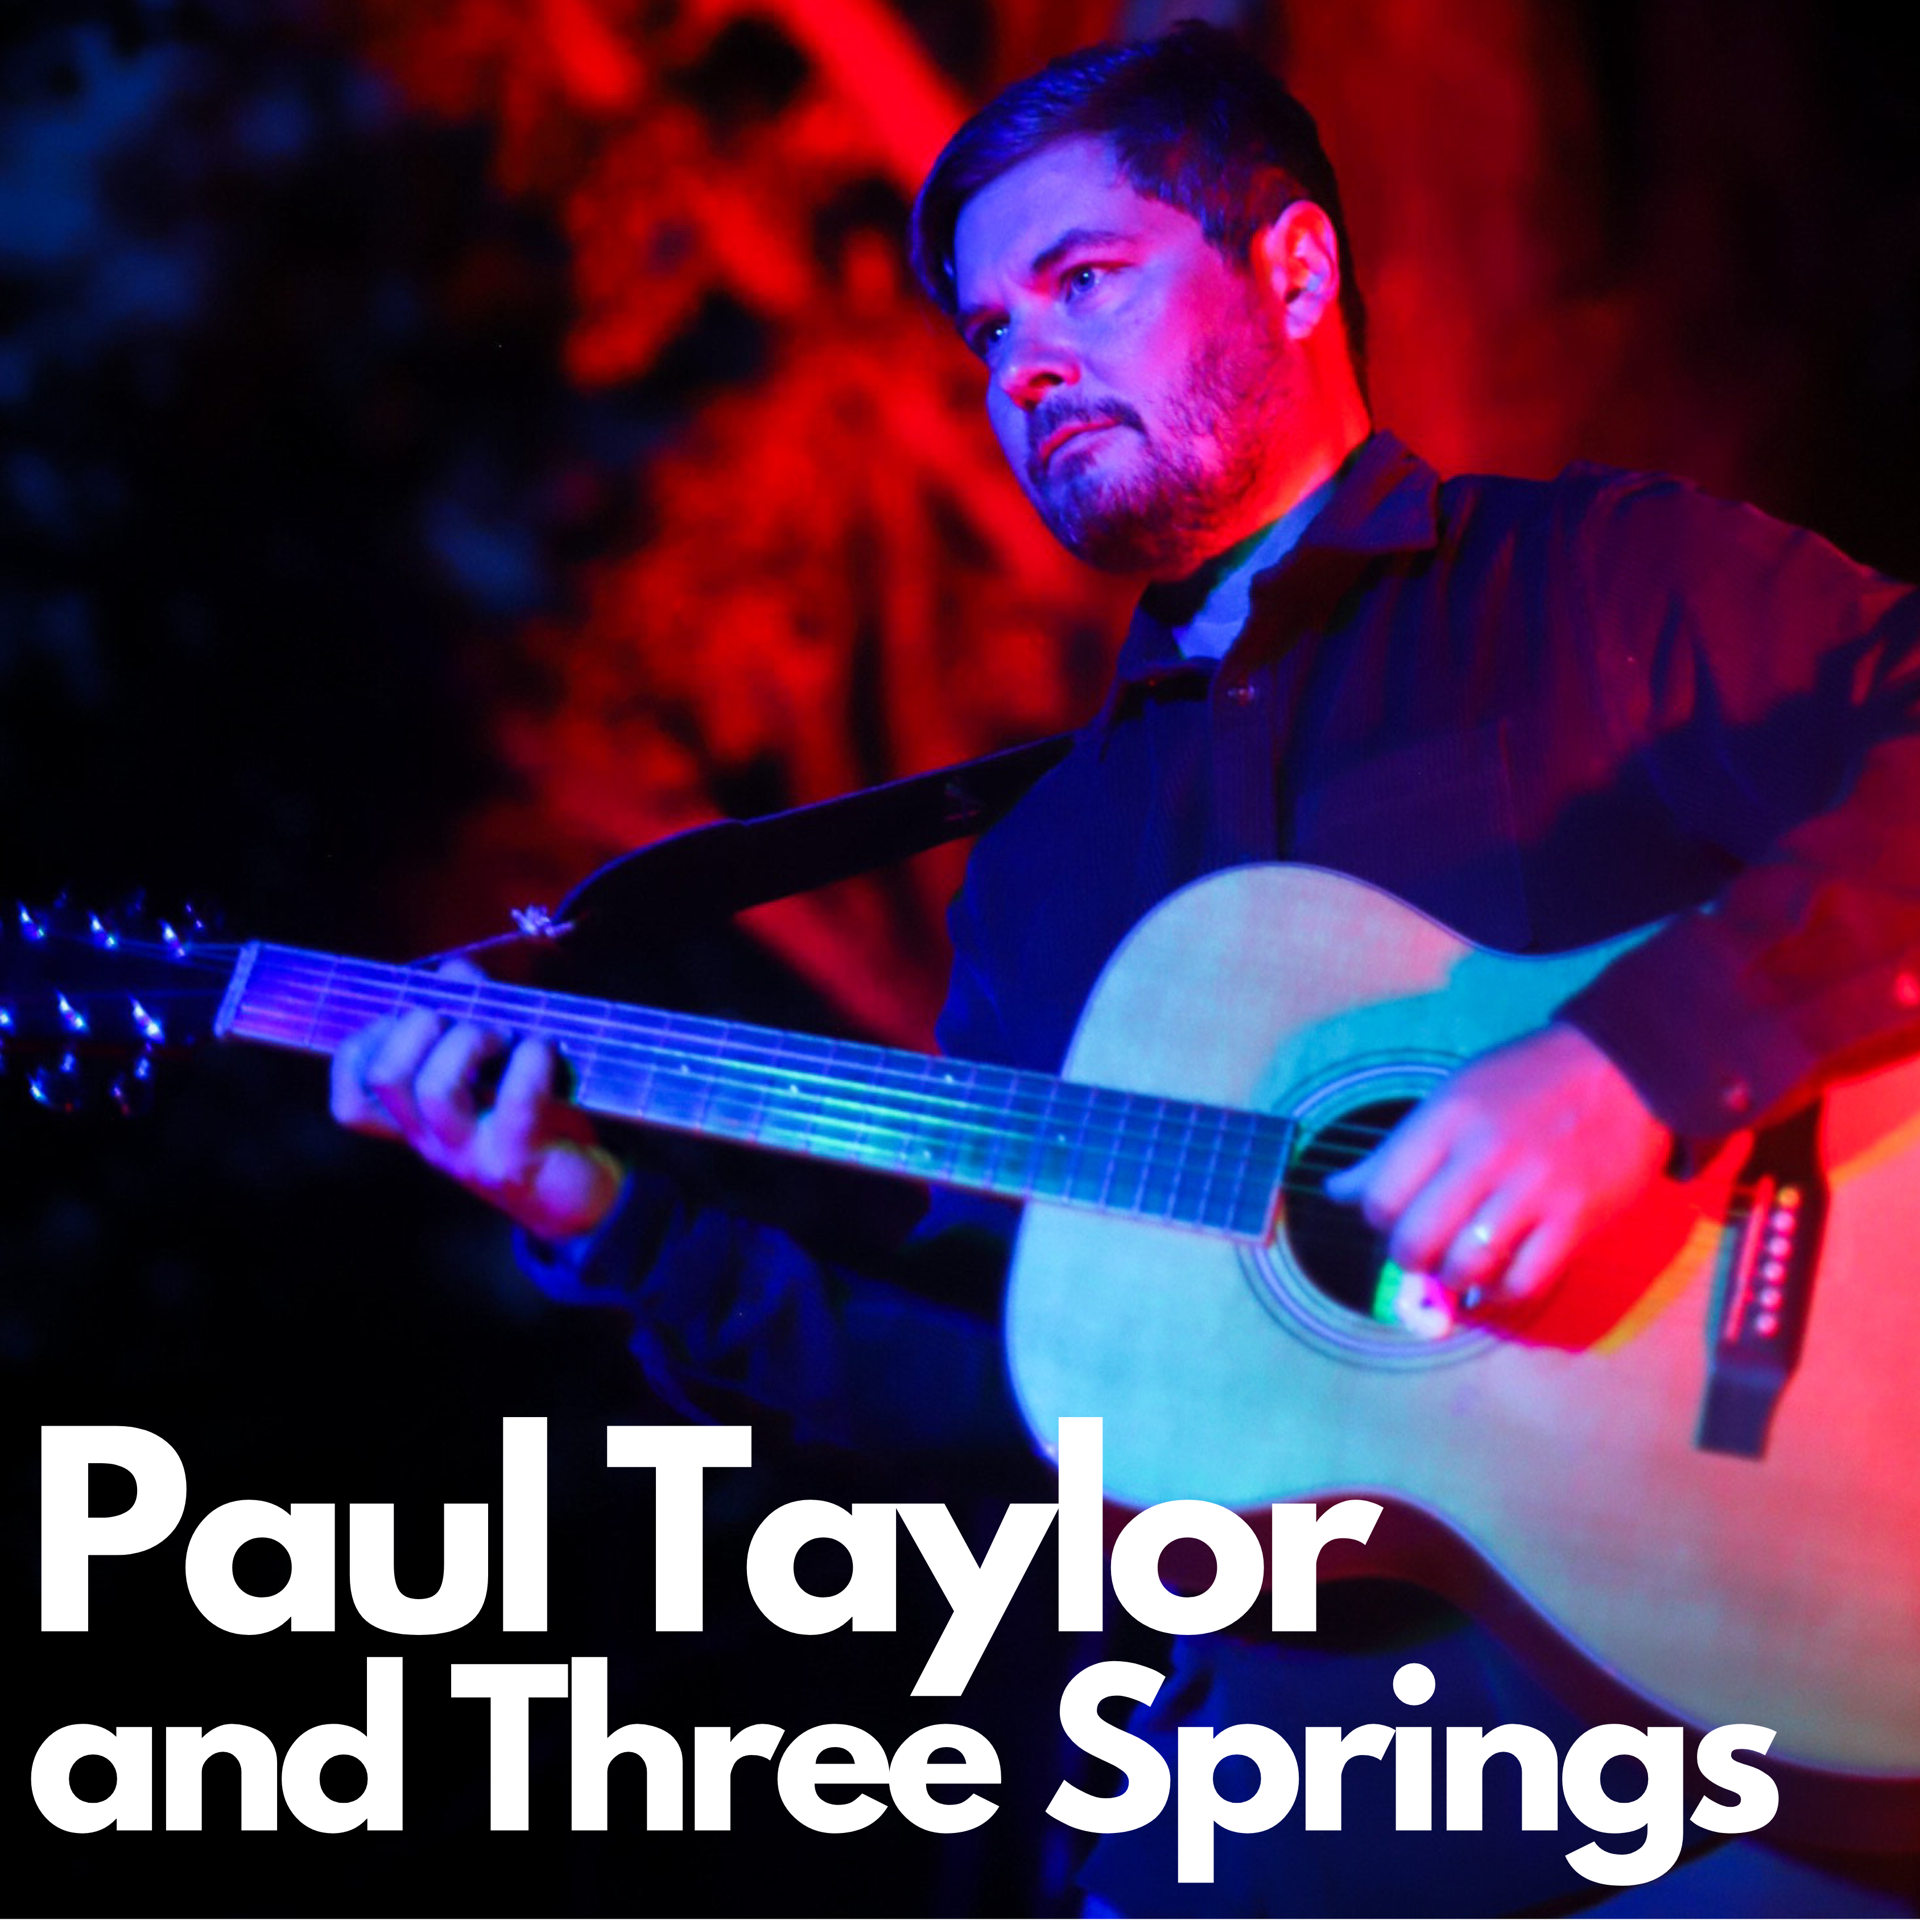 Paul Taylor and Three Springs October 5th